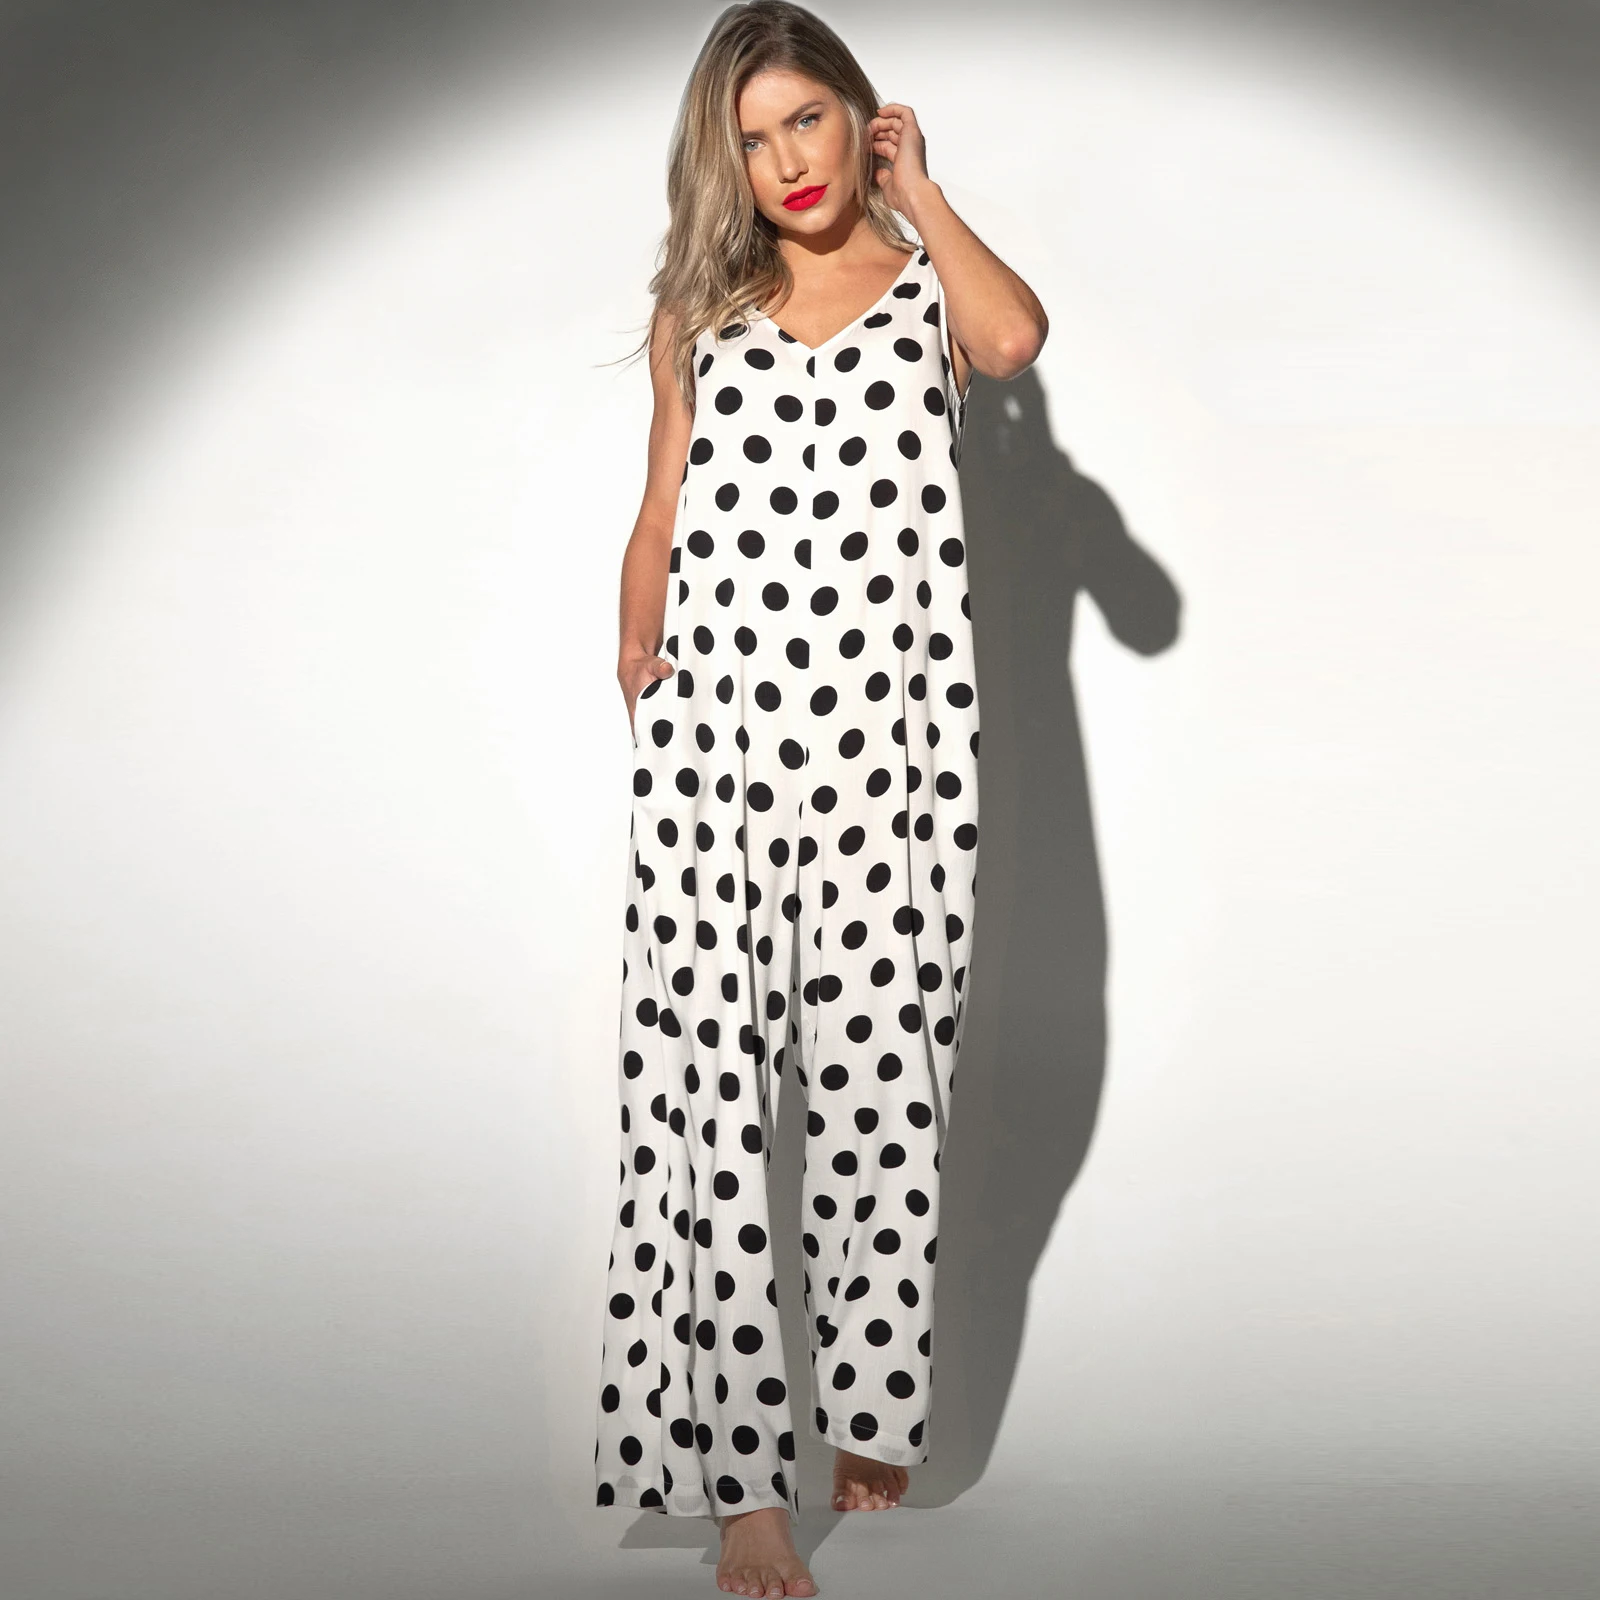 

2022 Trends Summer Womens One Piece Beach Jumpsuit With Pocket Casual Sleeveless Wide Leg Pant Latest Women'S Polka Dot Jumpsuit, White/black/khaki latest women's polka dot jumpsuit